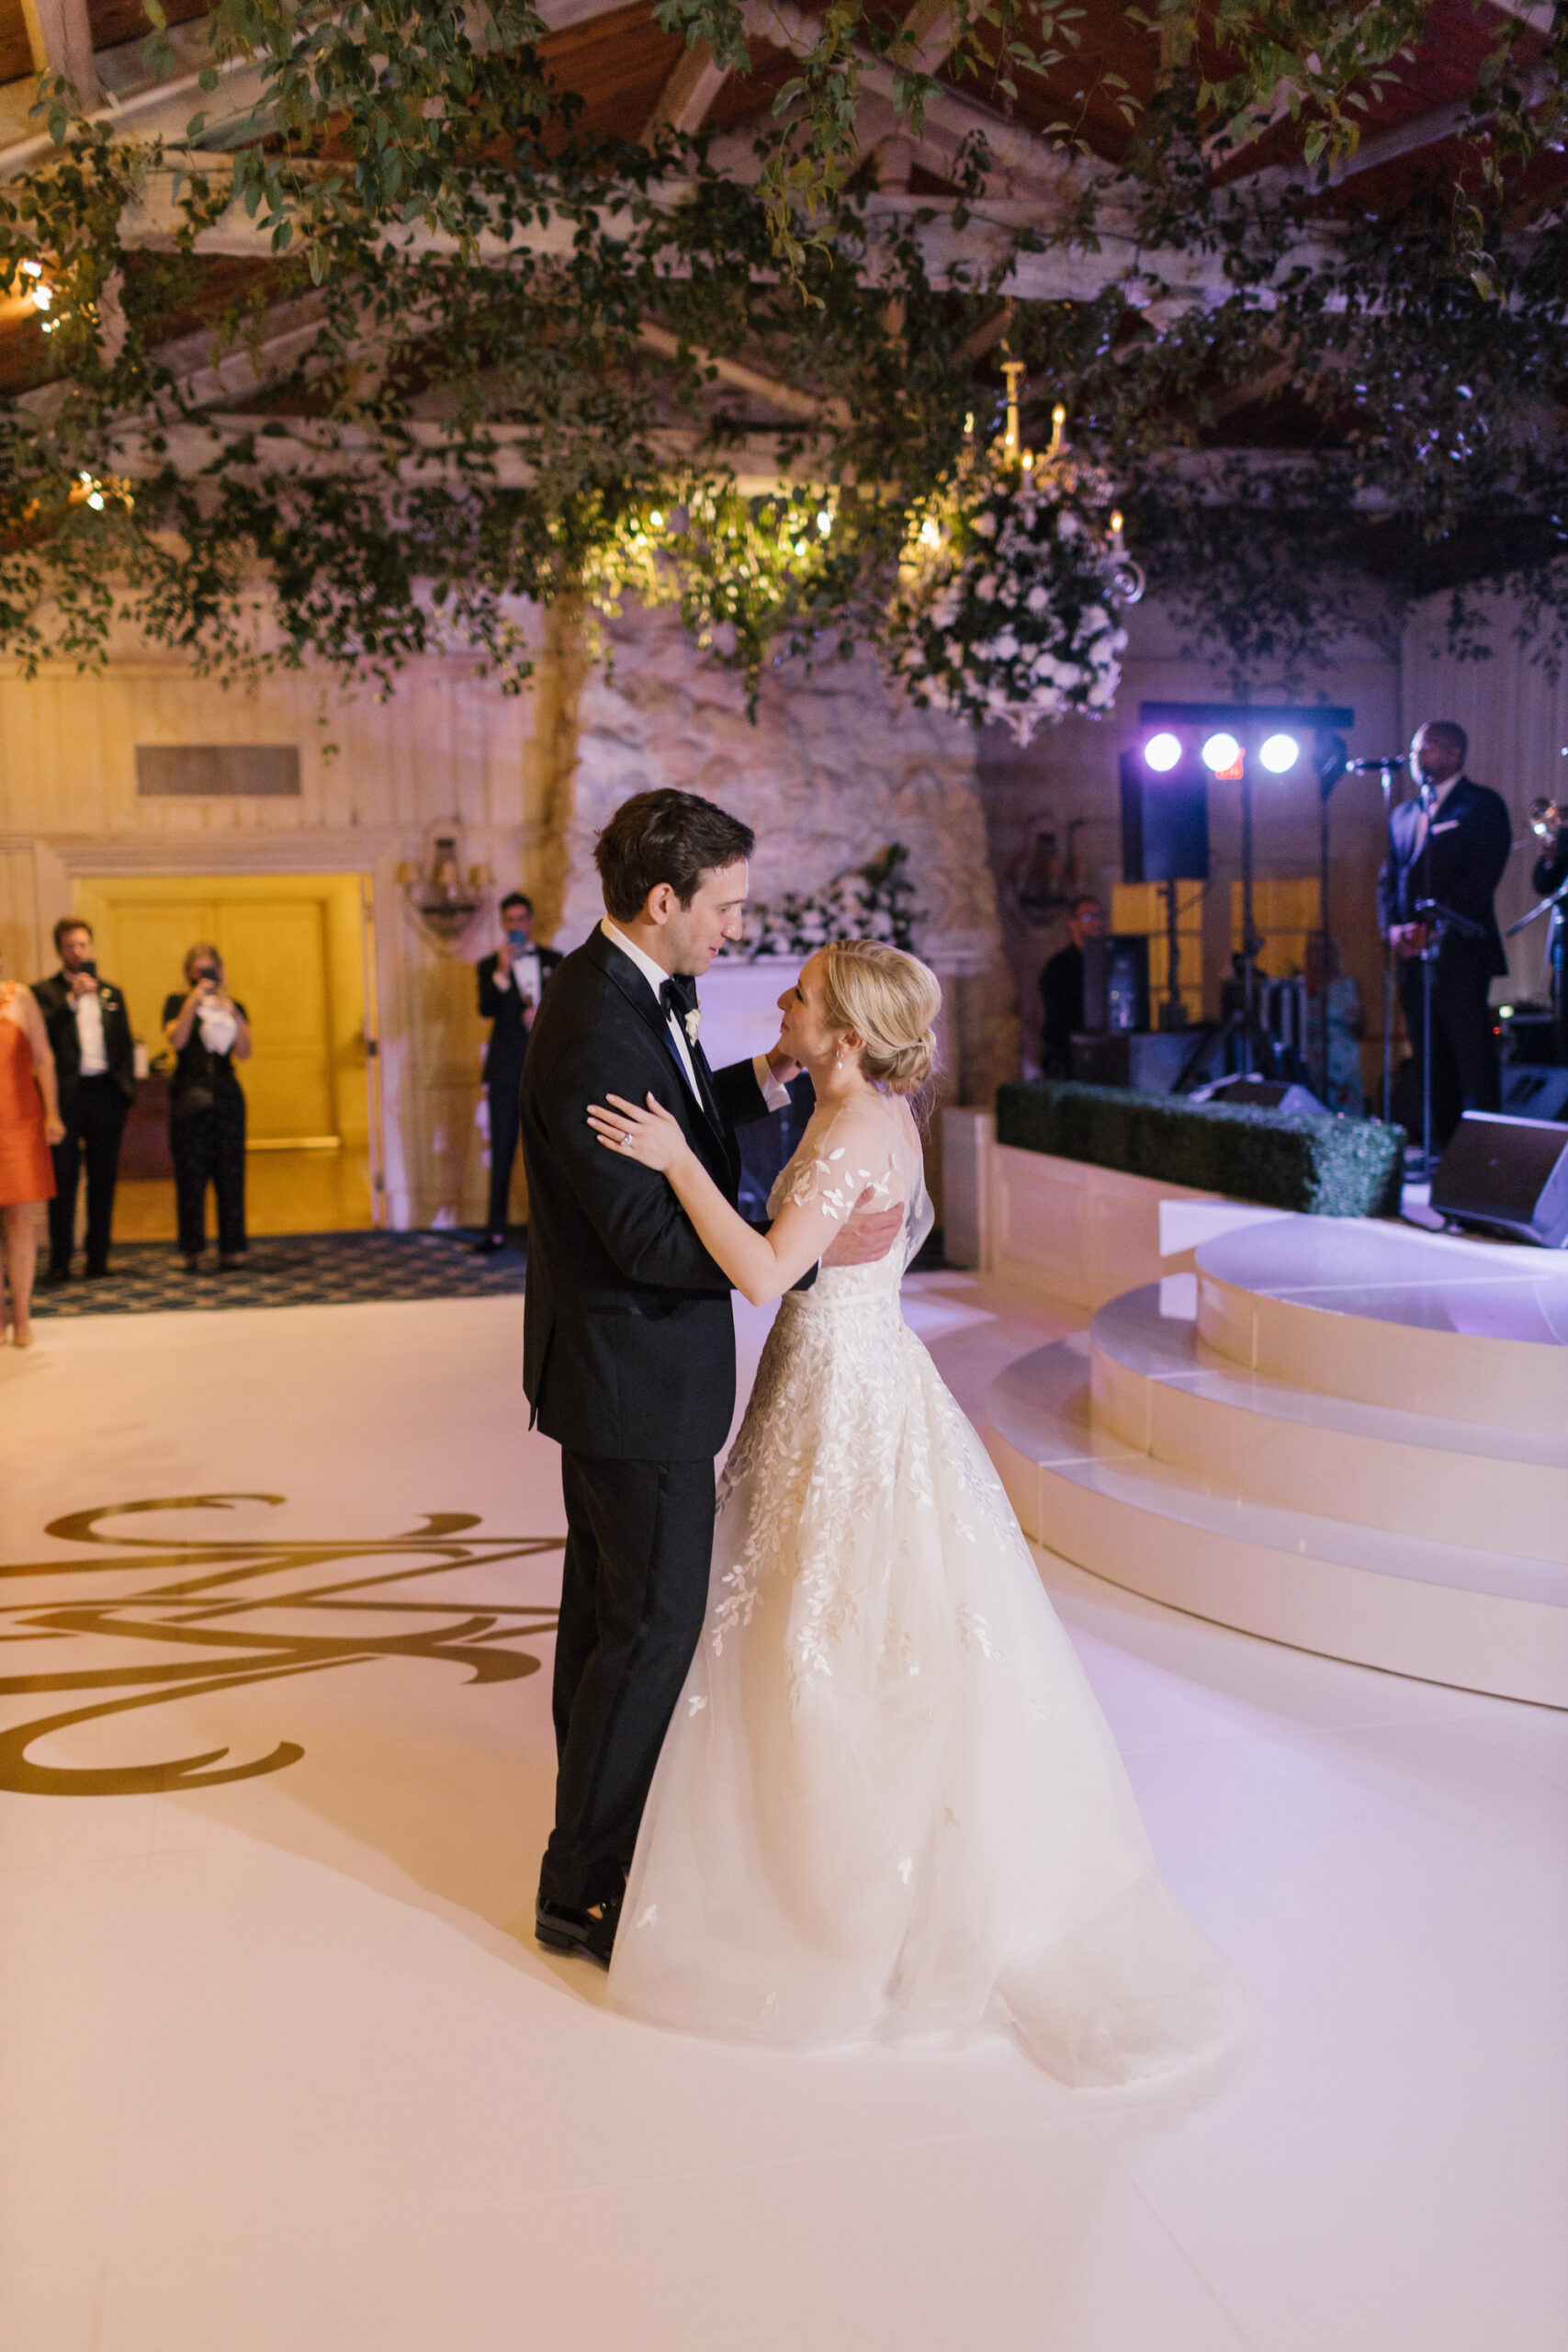 Bride and Groom First Dance | Timeless Wedding Reception Inspiration | Tampa Bay Planner Parties A La Carte